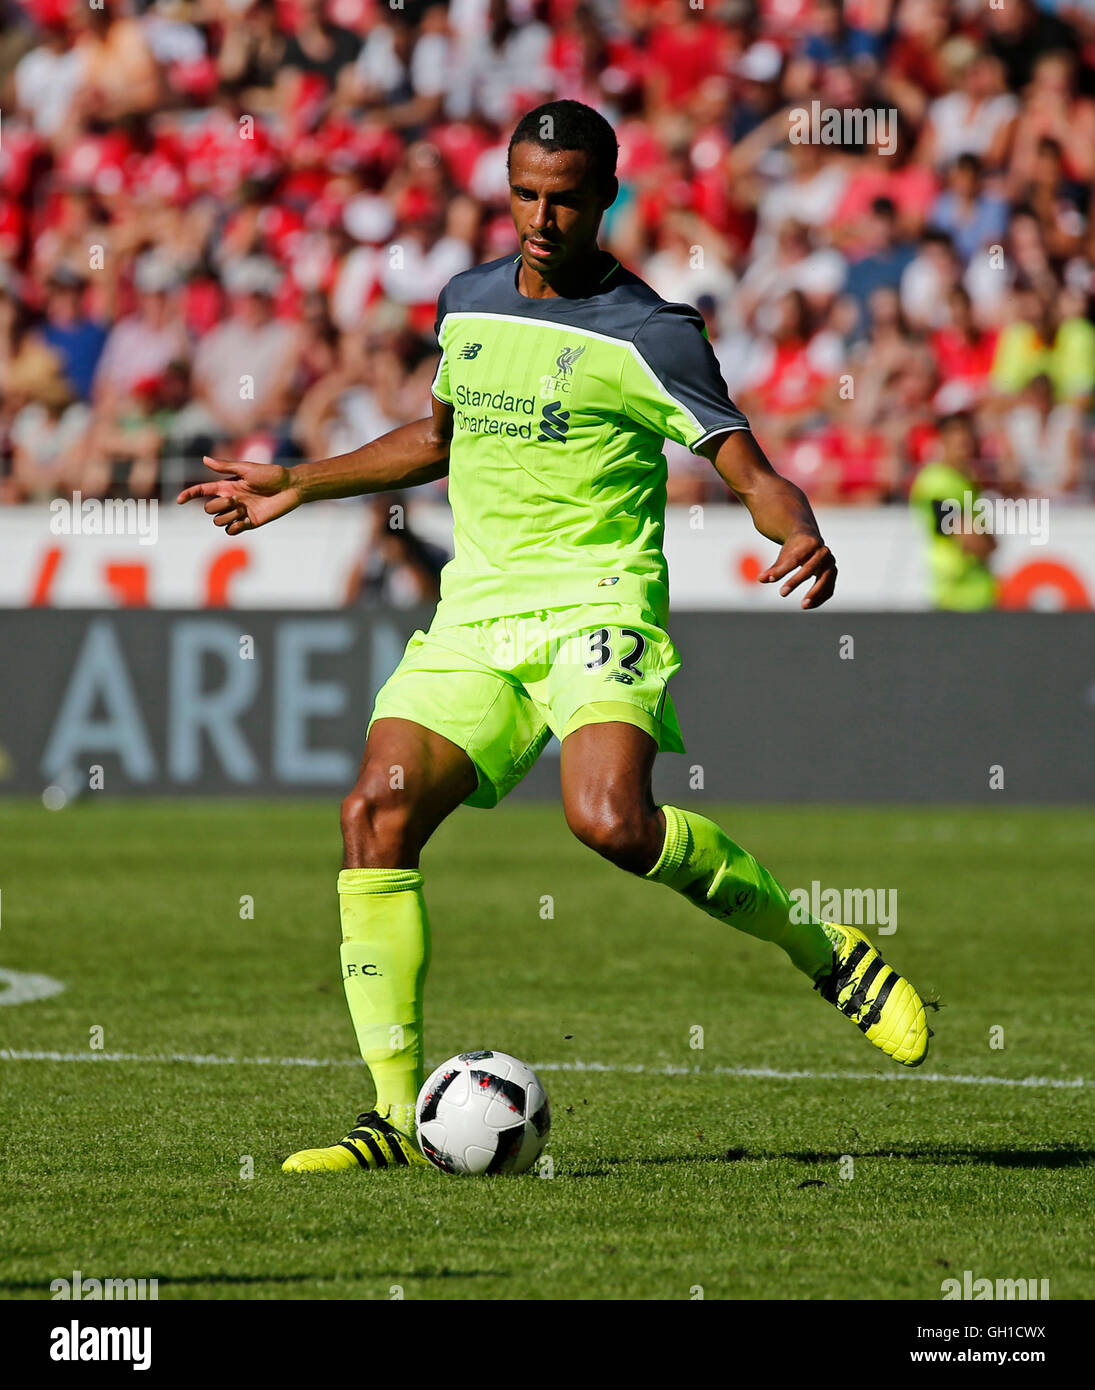 Mainz, Germany. 7th Aug, 2016. Liverpool's Joel Matip in action during the soccer test match between FSV Mainz 05 and FC Liverpool at Opel Arena in Mainz, Germany, 7 August 2016. PHOTO: RONALD WITTEK/dpa/Alamy Live News Stock Photo